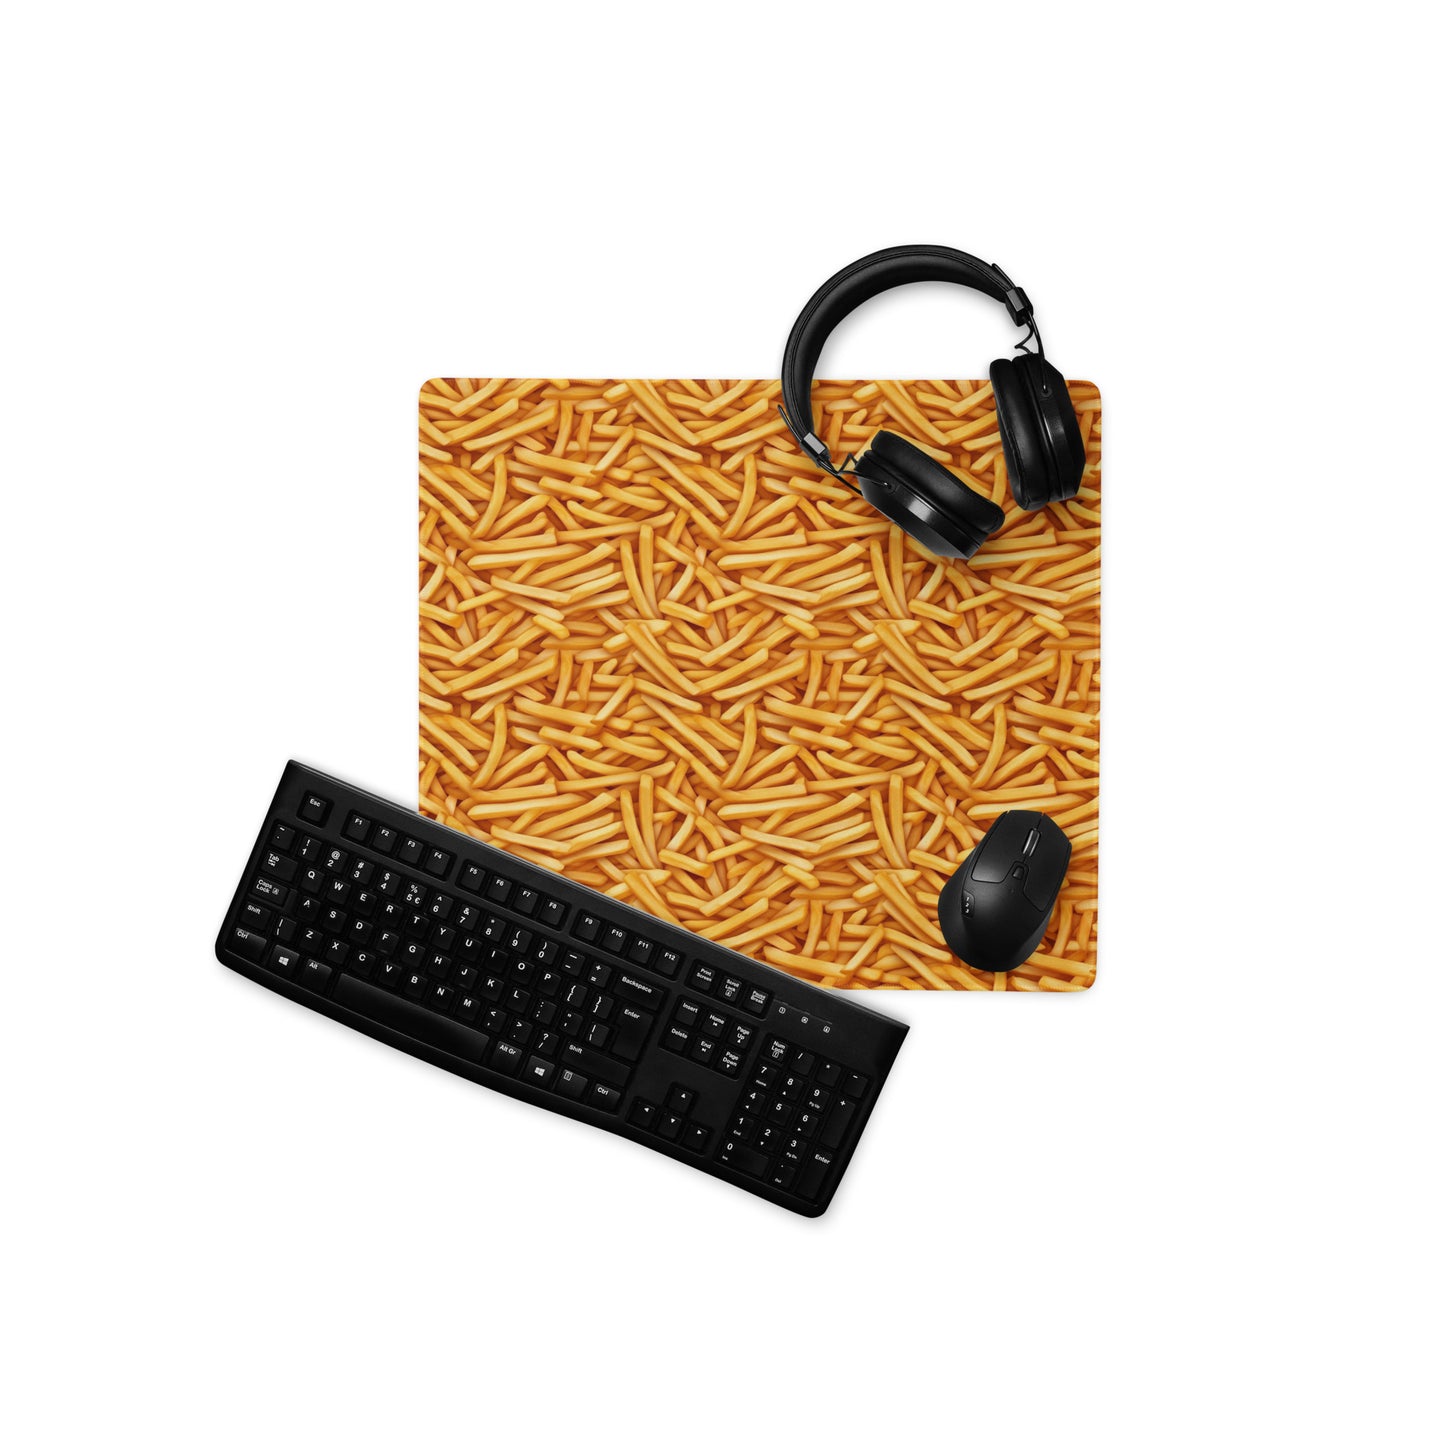 A 18" x 16" desk pad with a bunch of french fries all over it displayed with a keyboard, headphones and a mouse. Yellow in color.